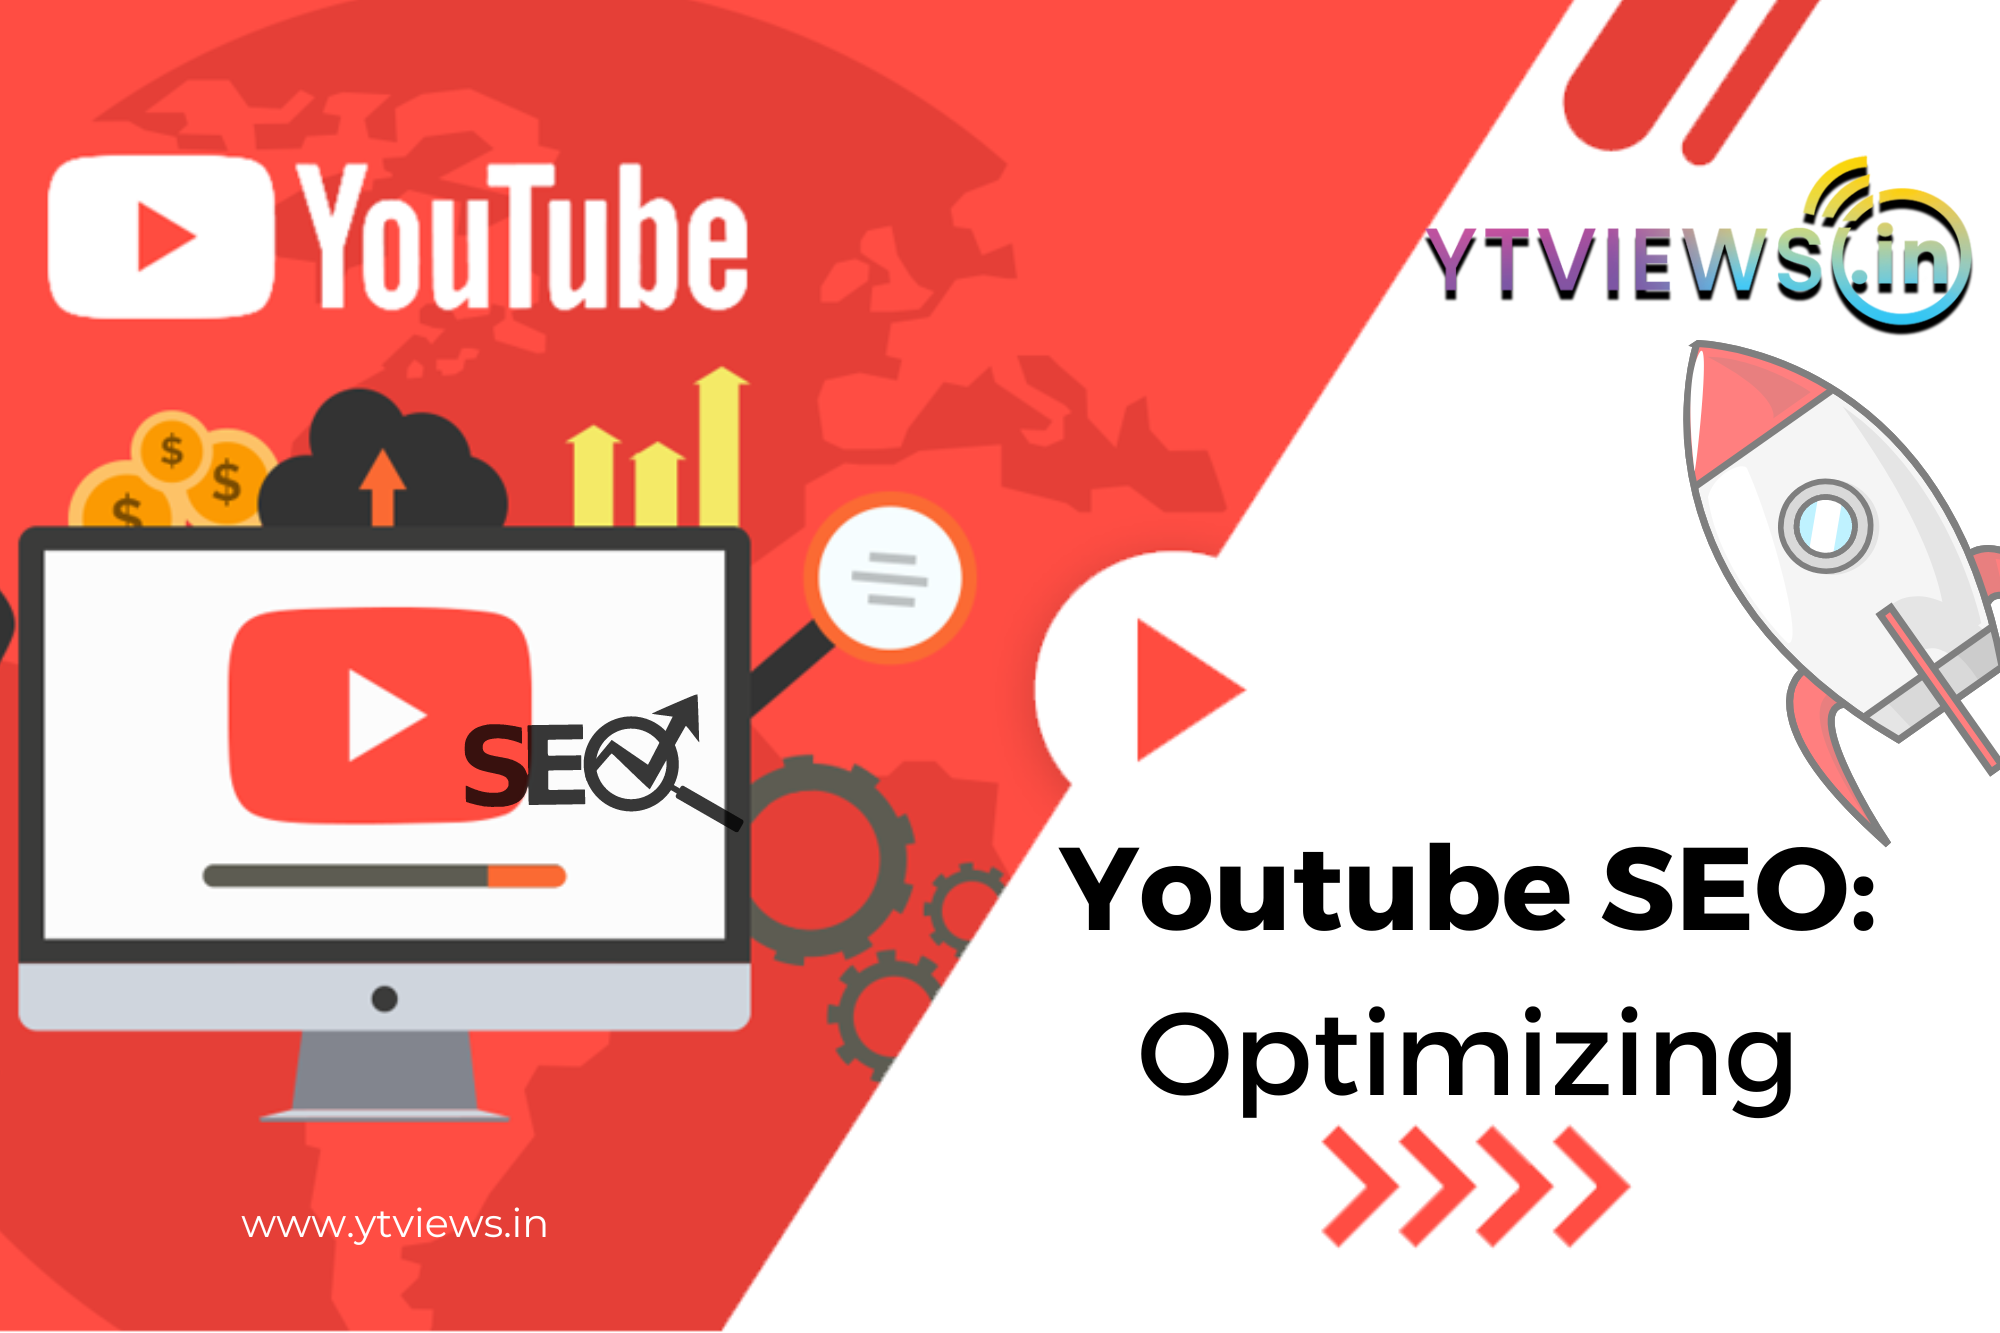 Youtube SEO: Optimizing your videos for higher rankings